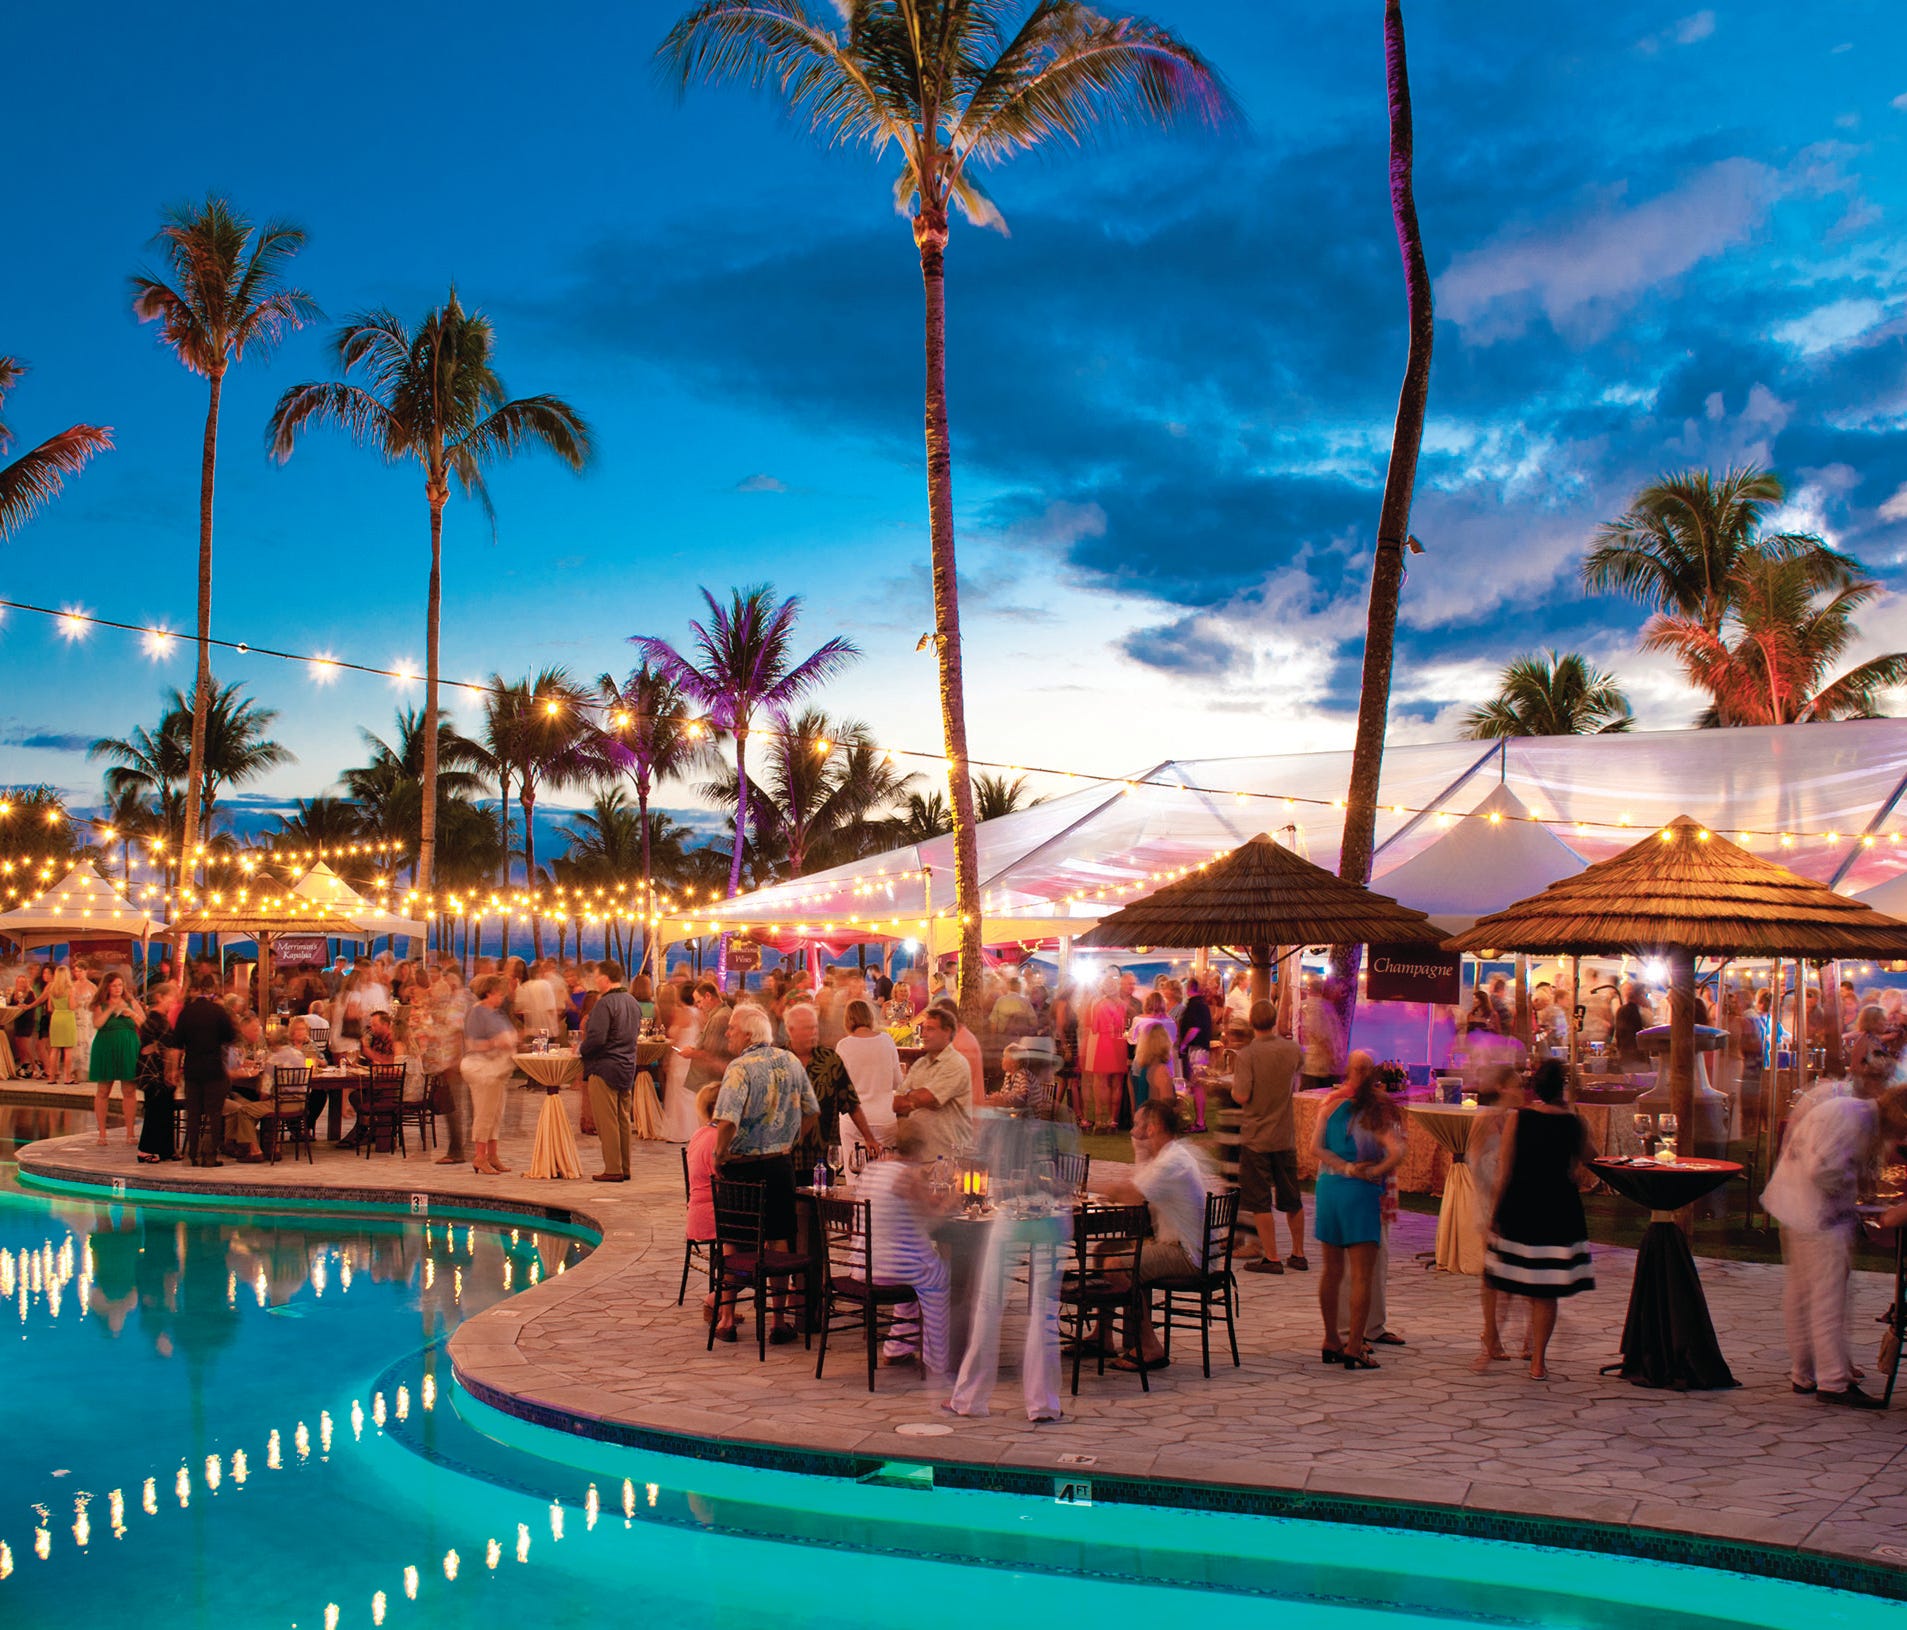 The 37th annual Kapalua Wine and Food Festival will take place at The-Ritz-Carlton, Kapalua in Maui, June 7-10. Celebrity chefs will participate in demonstrations, dinners, tastings and more events.